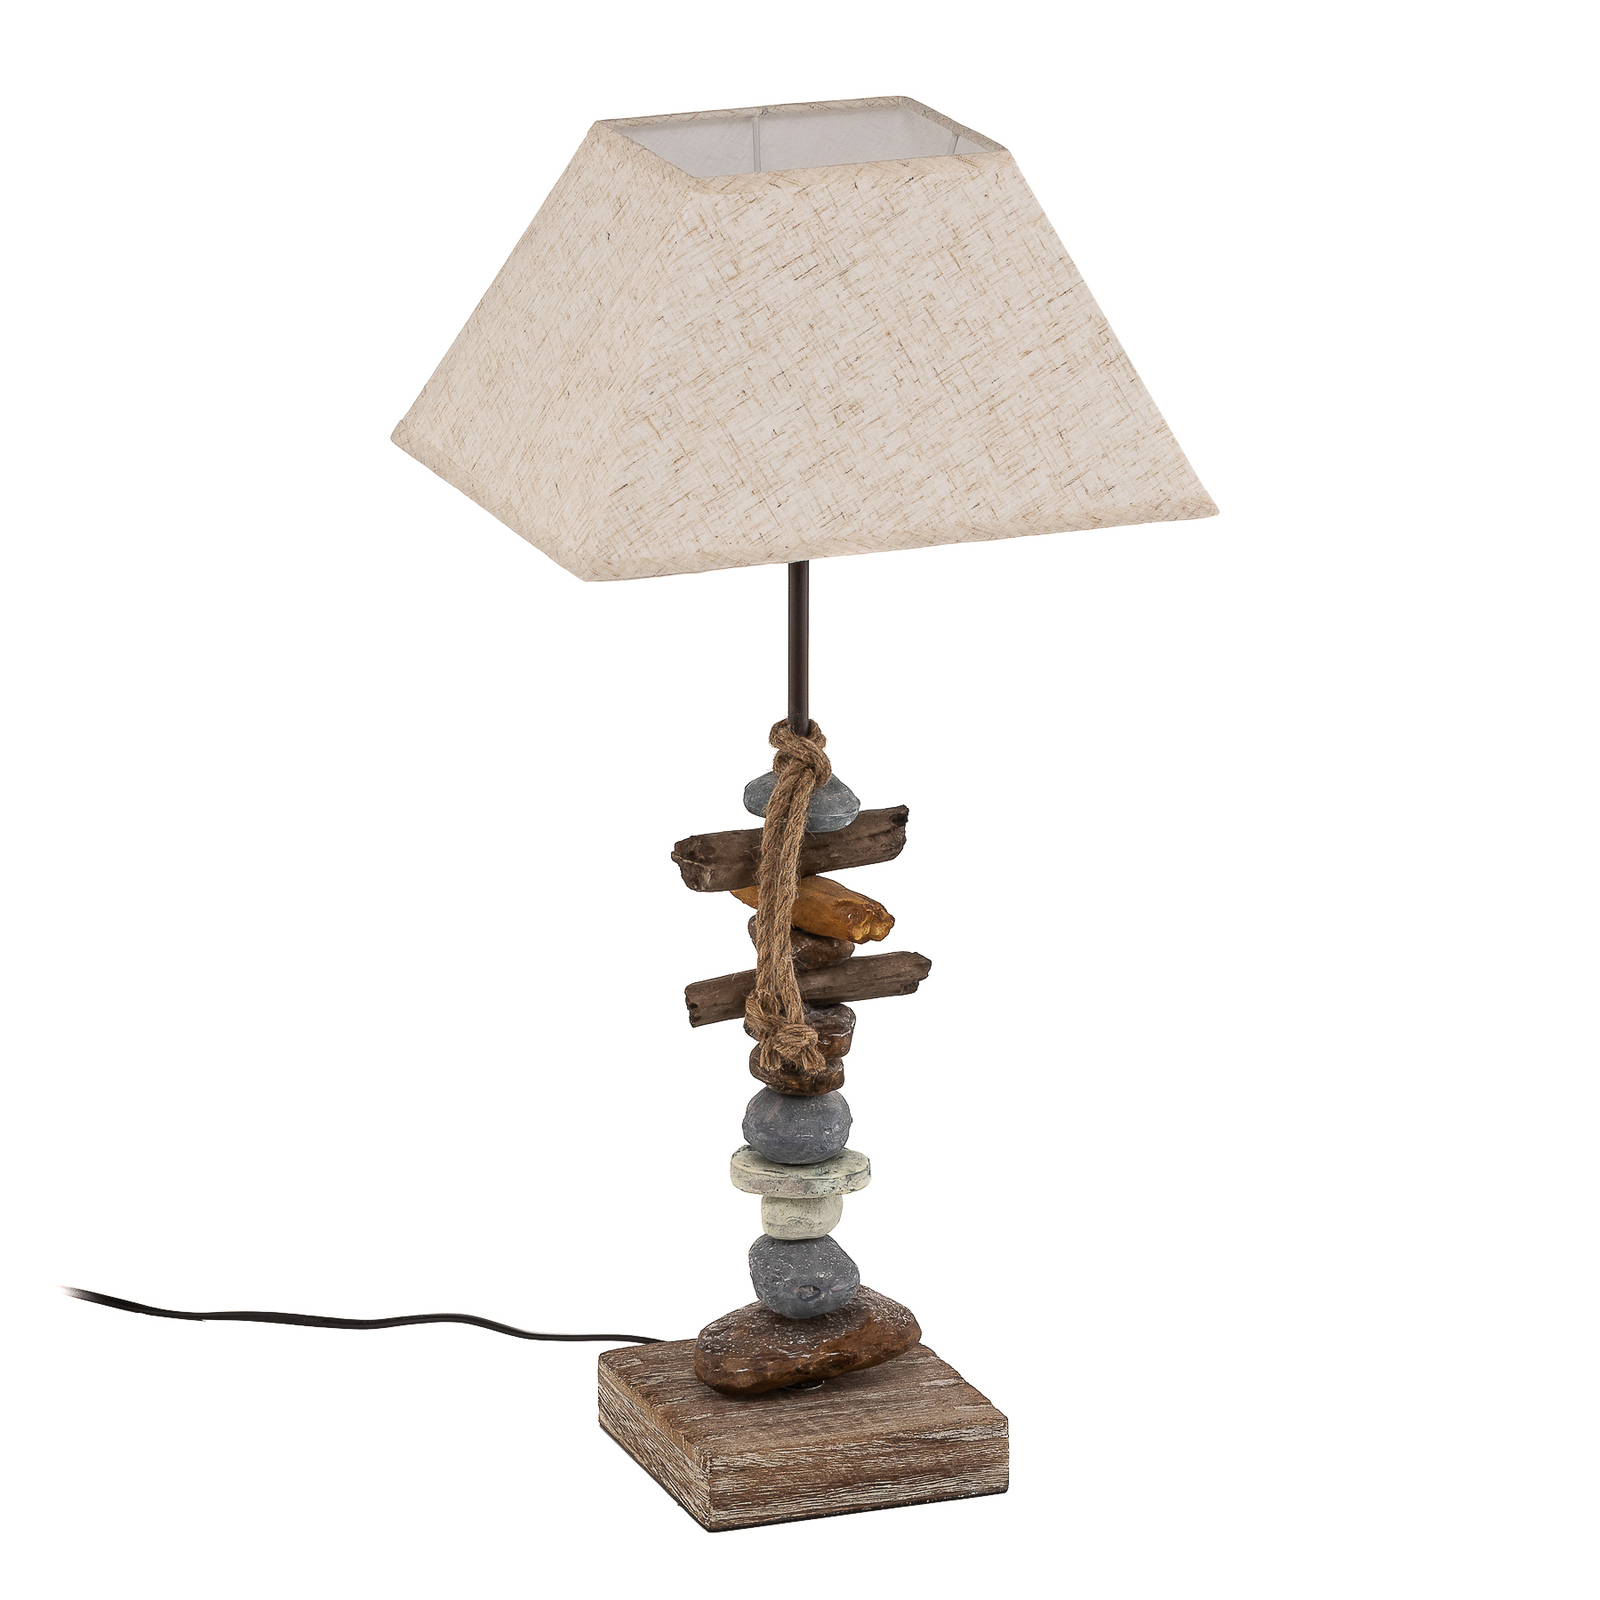 Seregon table lamp with stone decoration, height 63 cm